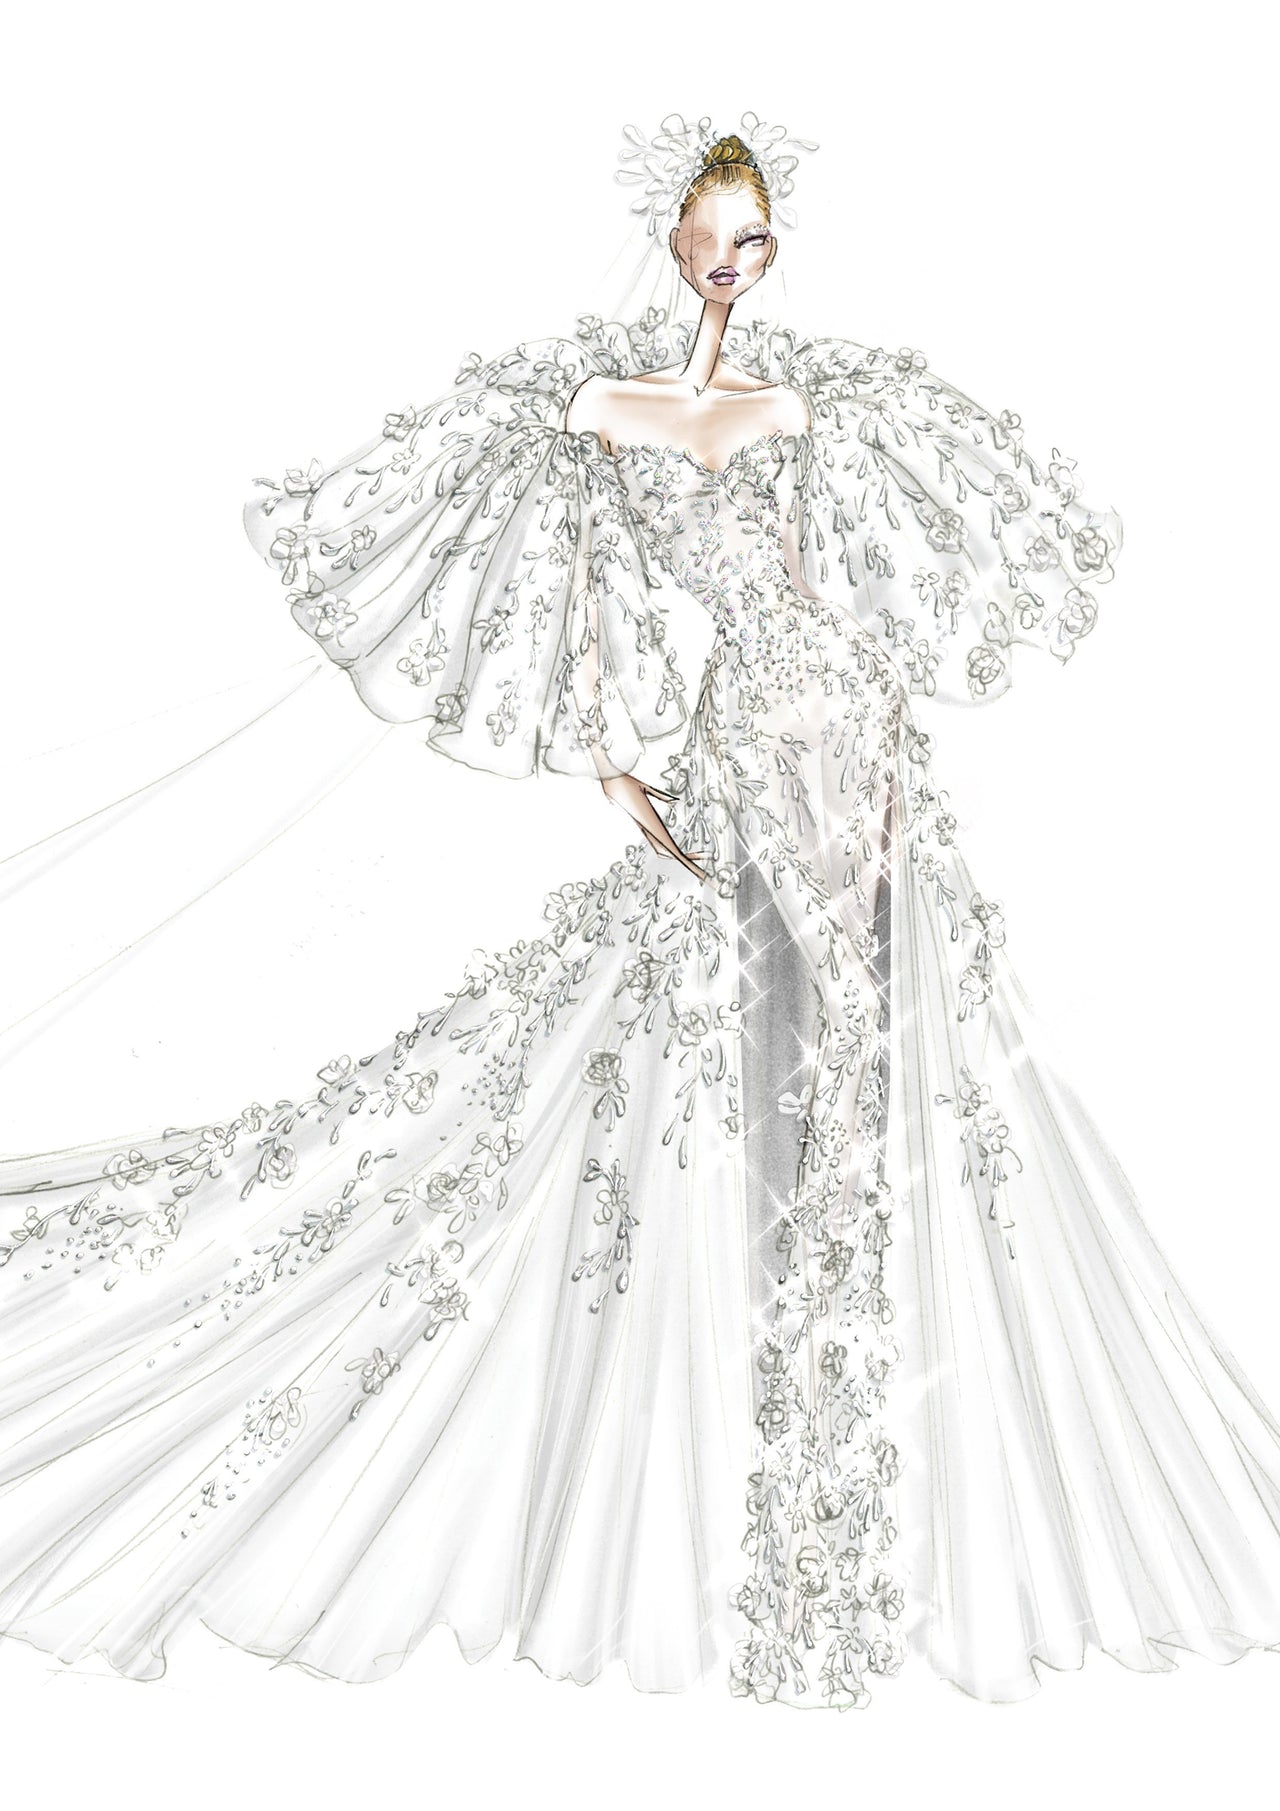 Couture Autumn Winter 2020 | Ralph & Russo